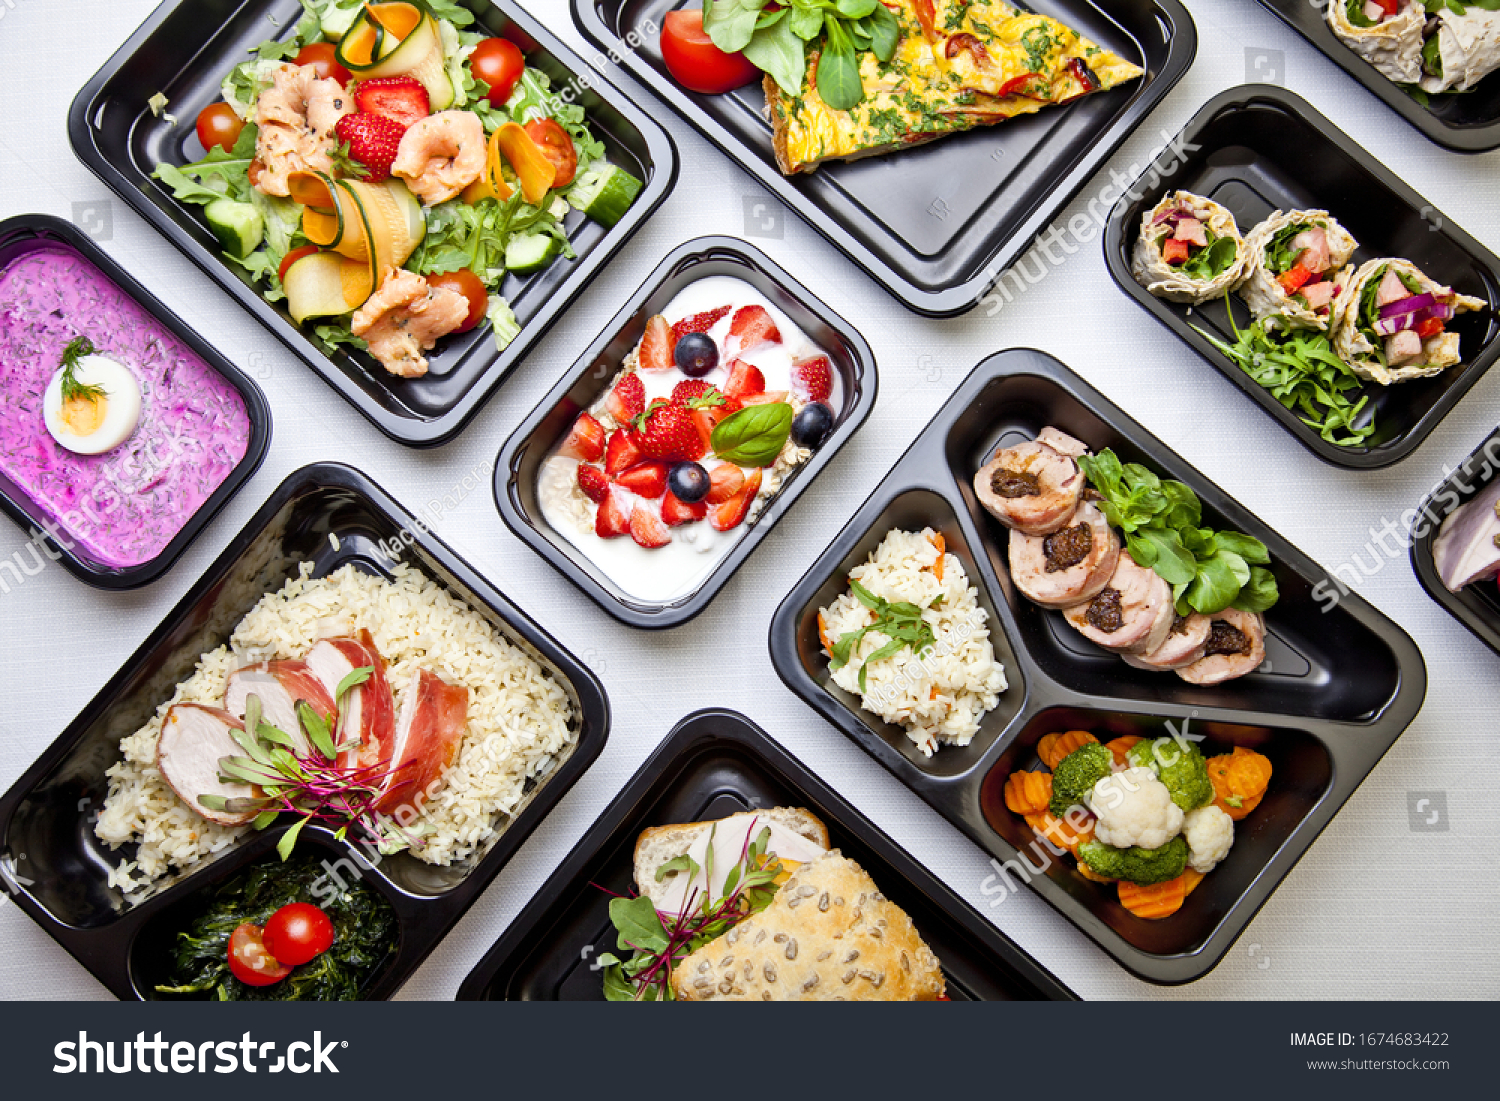 Catering food with healthy balanced diet delicious lunch box boxed take away deliver packed ready  meal in black container dinner, meal, brakfast #1674683422